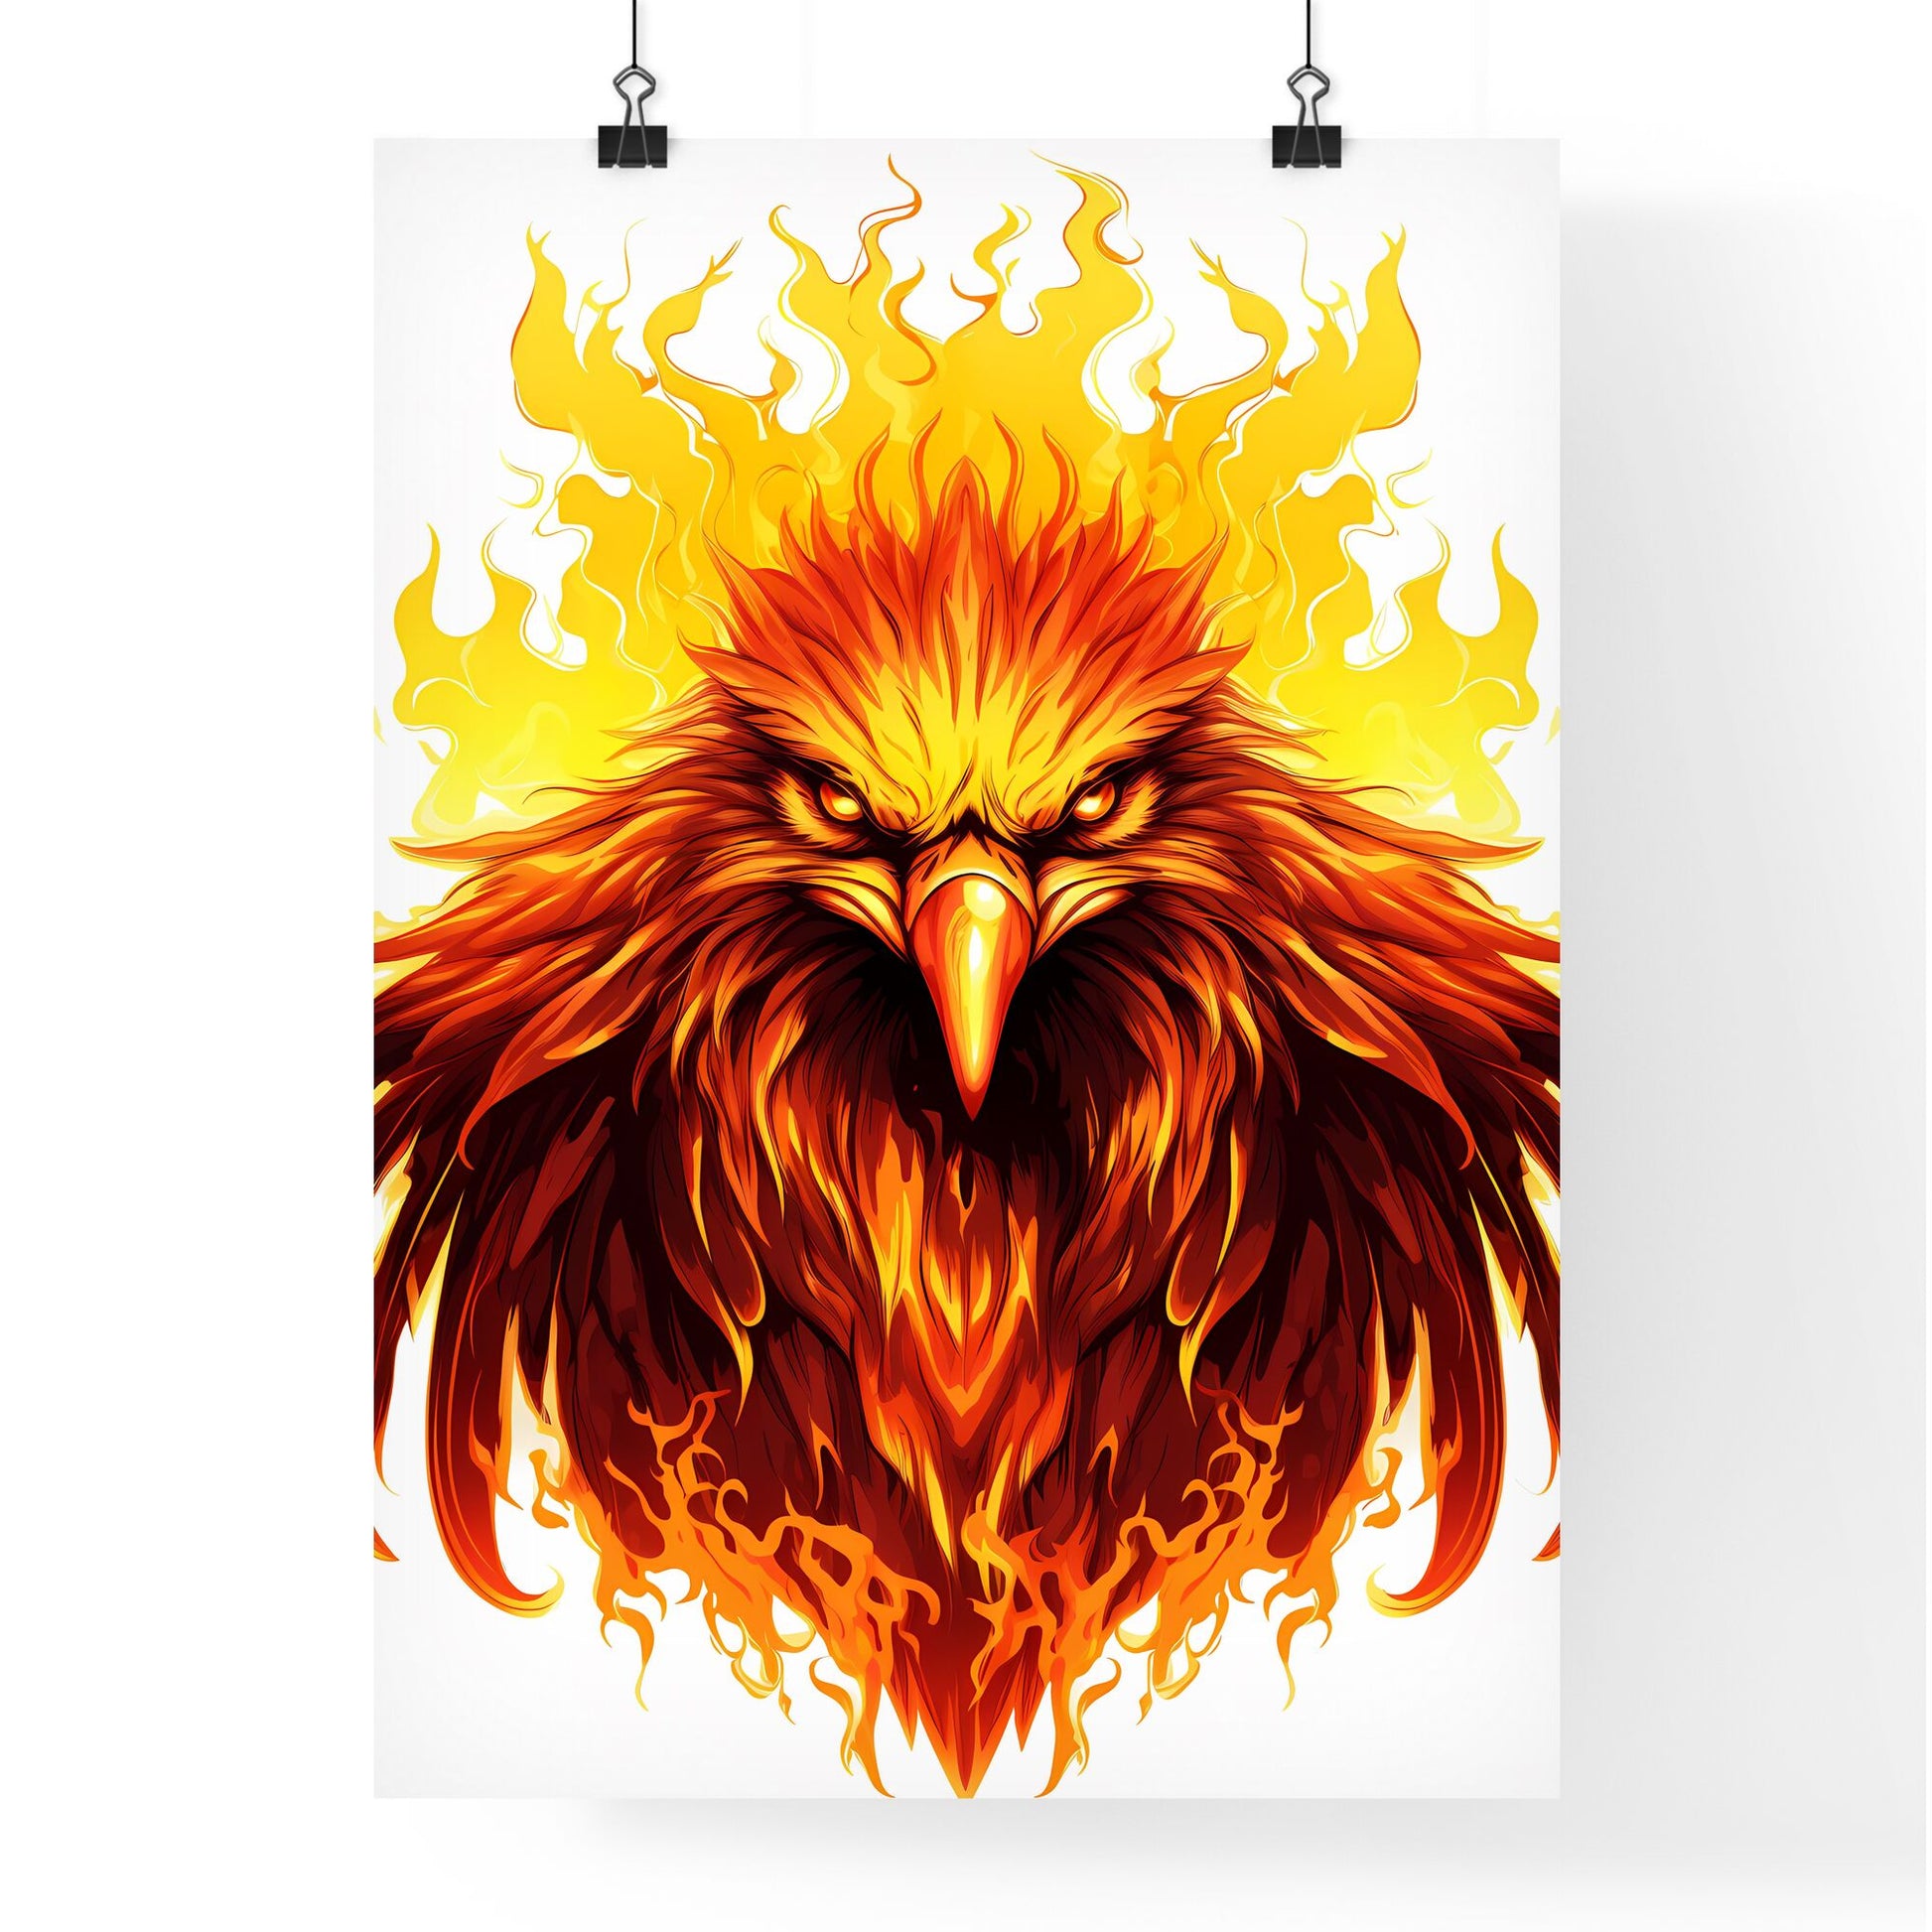 Vibrant Art of Eagle Soaring over Sun with Fire Flames Default Title